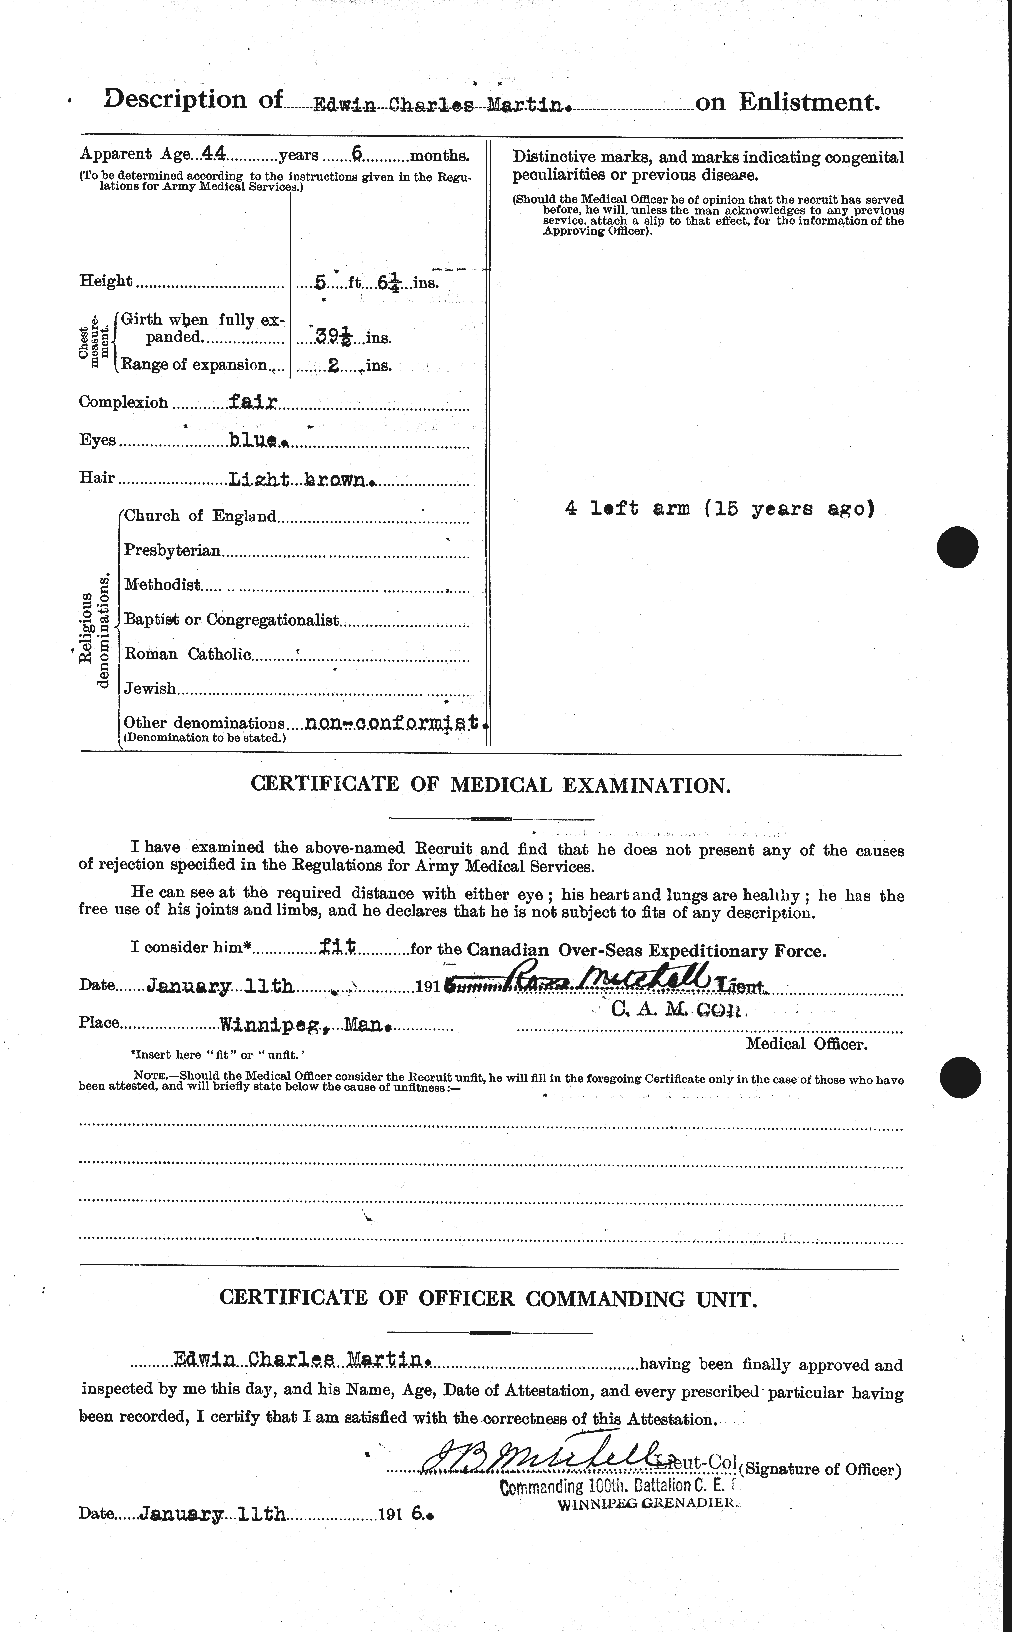 Personnel Records of the First World War - CEF 482899b